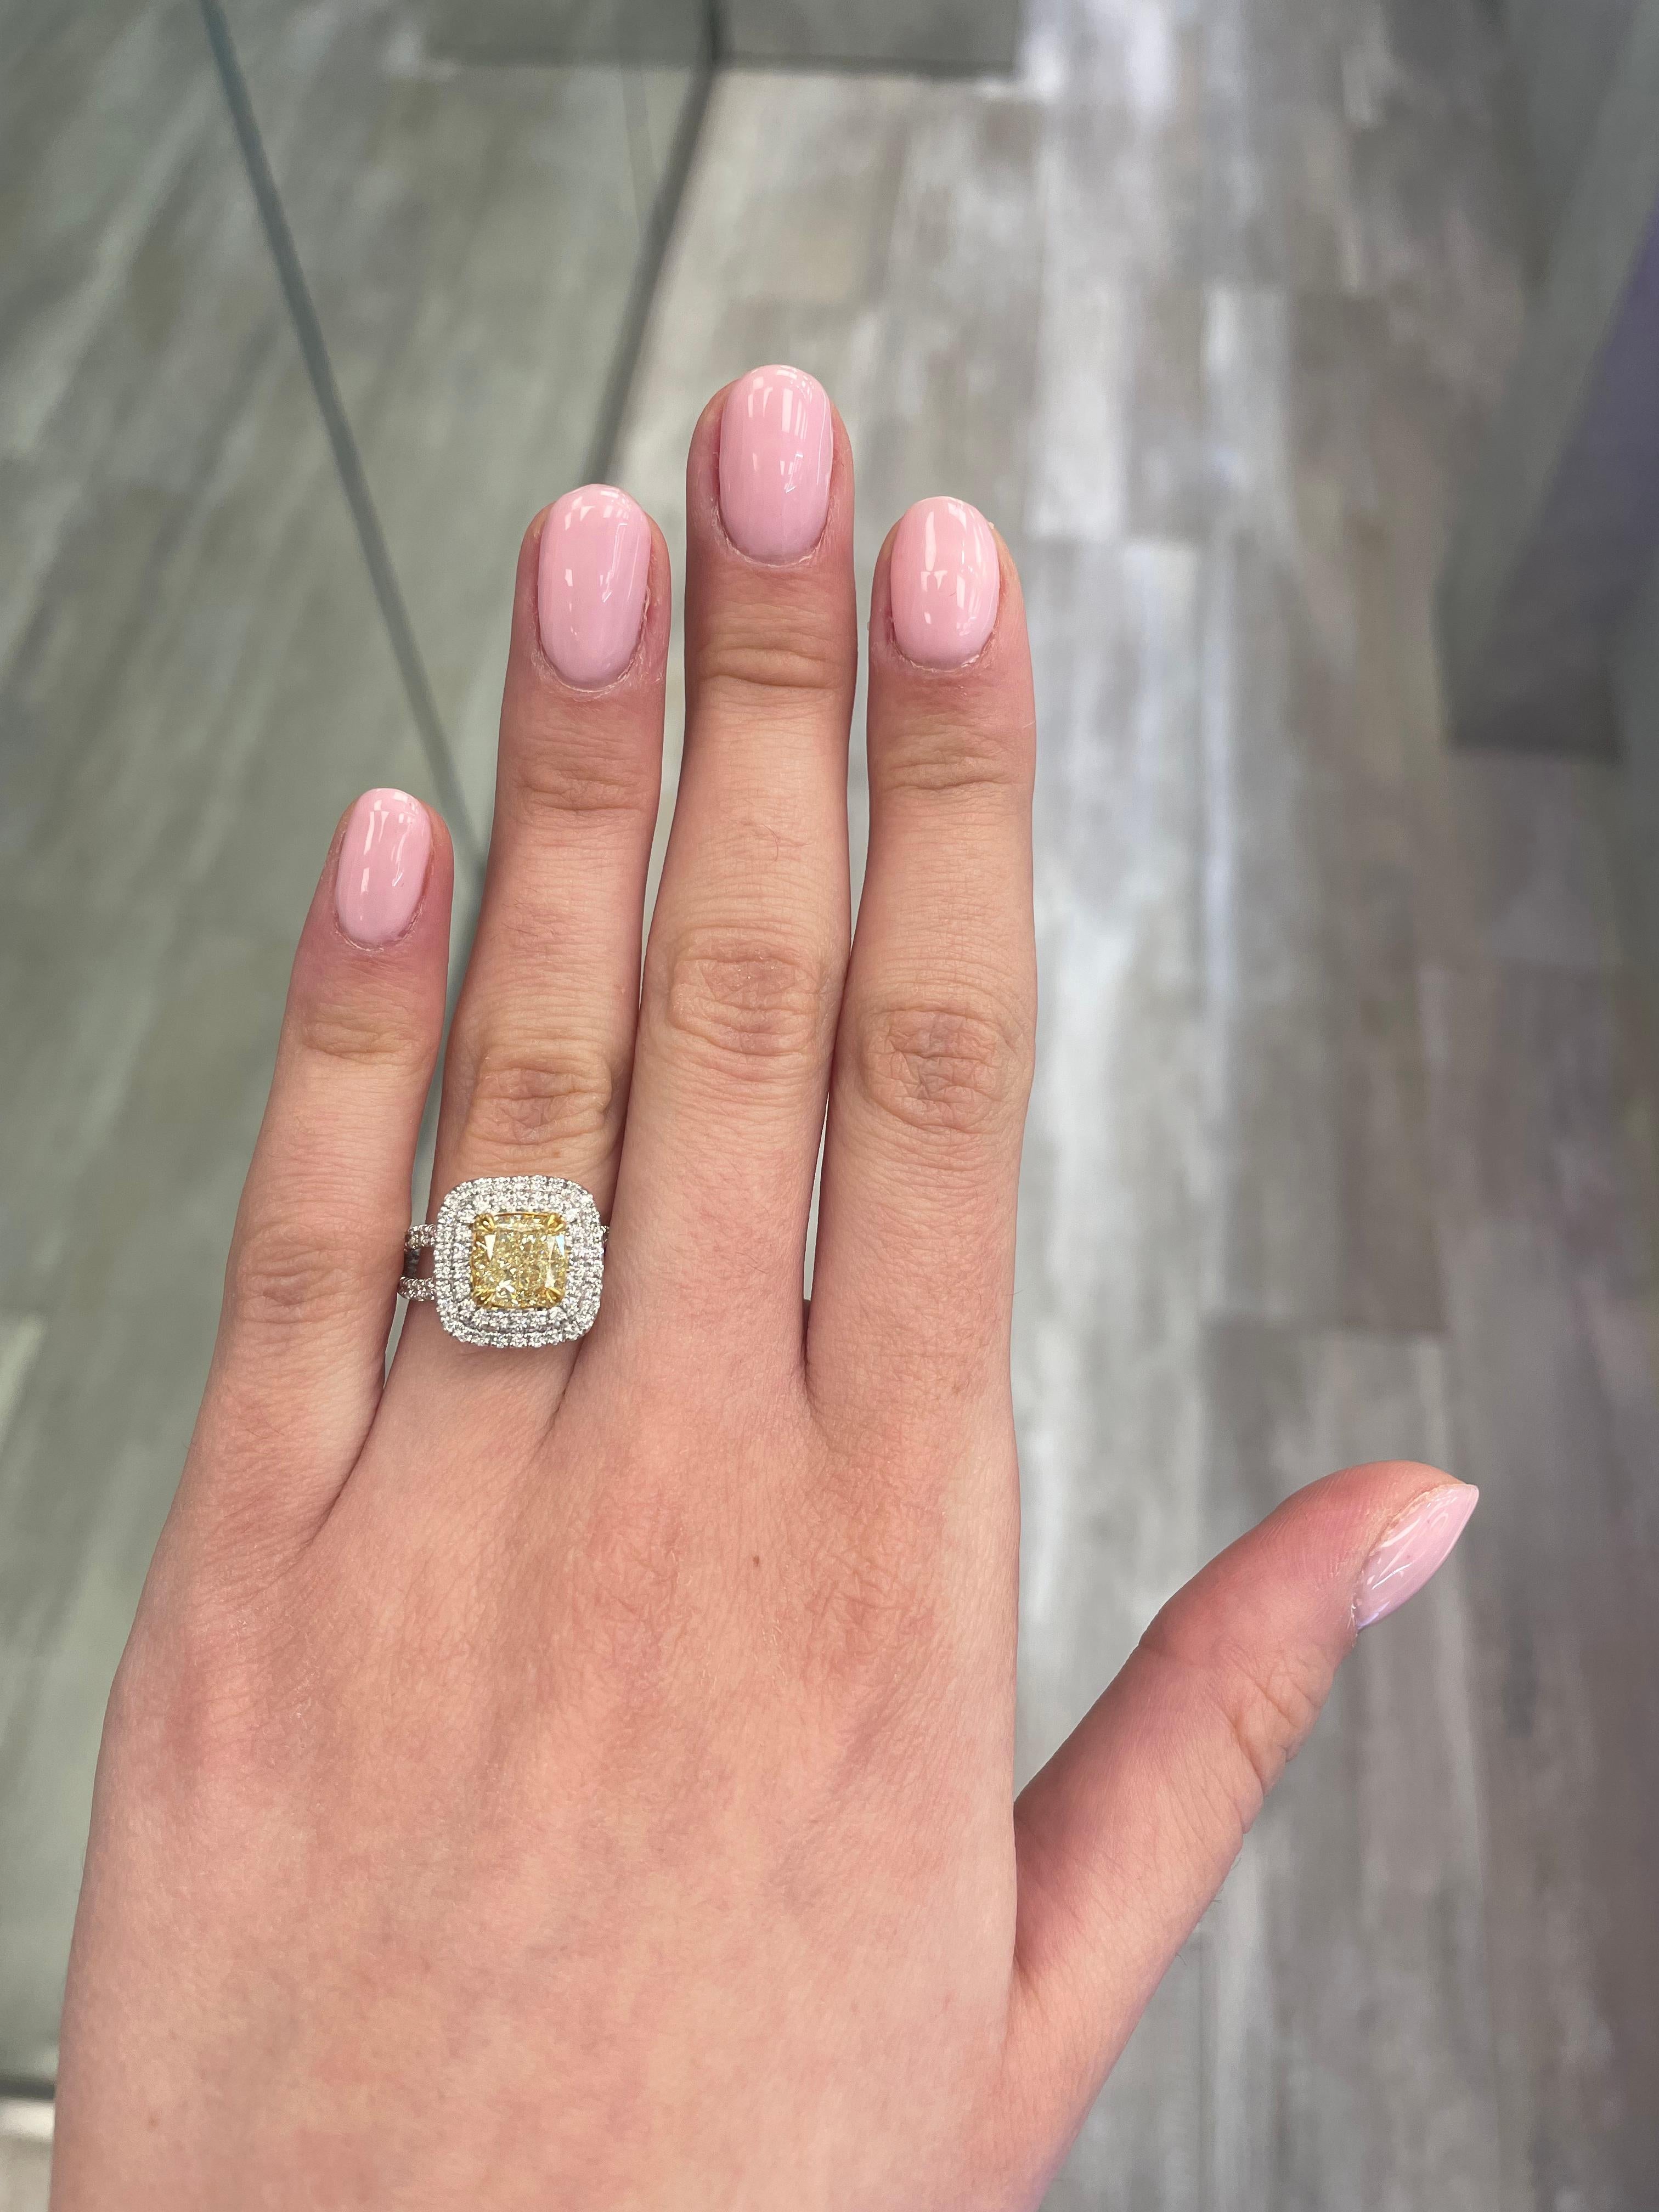 Stunning modern EGL certified yellow diamond double halo ring, two-tone 18k yellow and white gold. By Alexander Beverly Hills
3.01 carats total diamond weight.
2.11 carat cushion cut Fancy Intense Yellow color and VS2 clarity diamond, EGL graded in